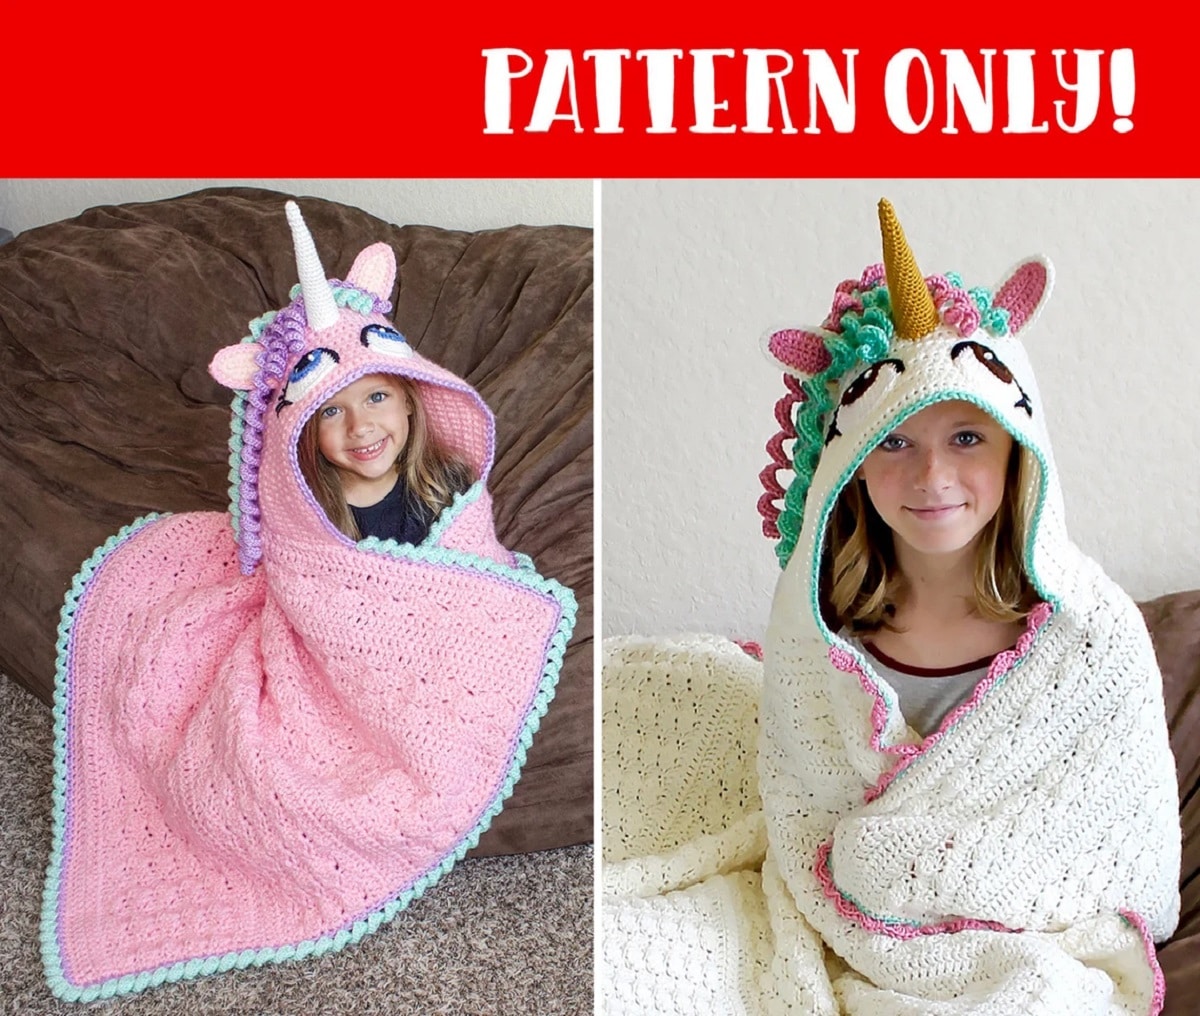 Two young girls in hooded crochet blankets with unicorn horns, ears and manes on top. One blanket is pink and the other is cream.